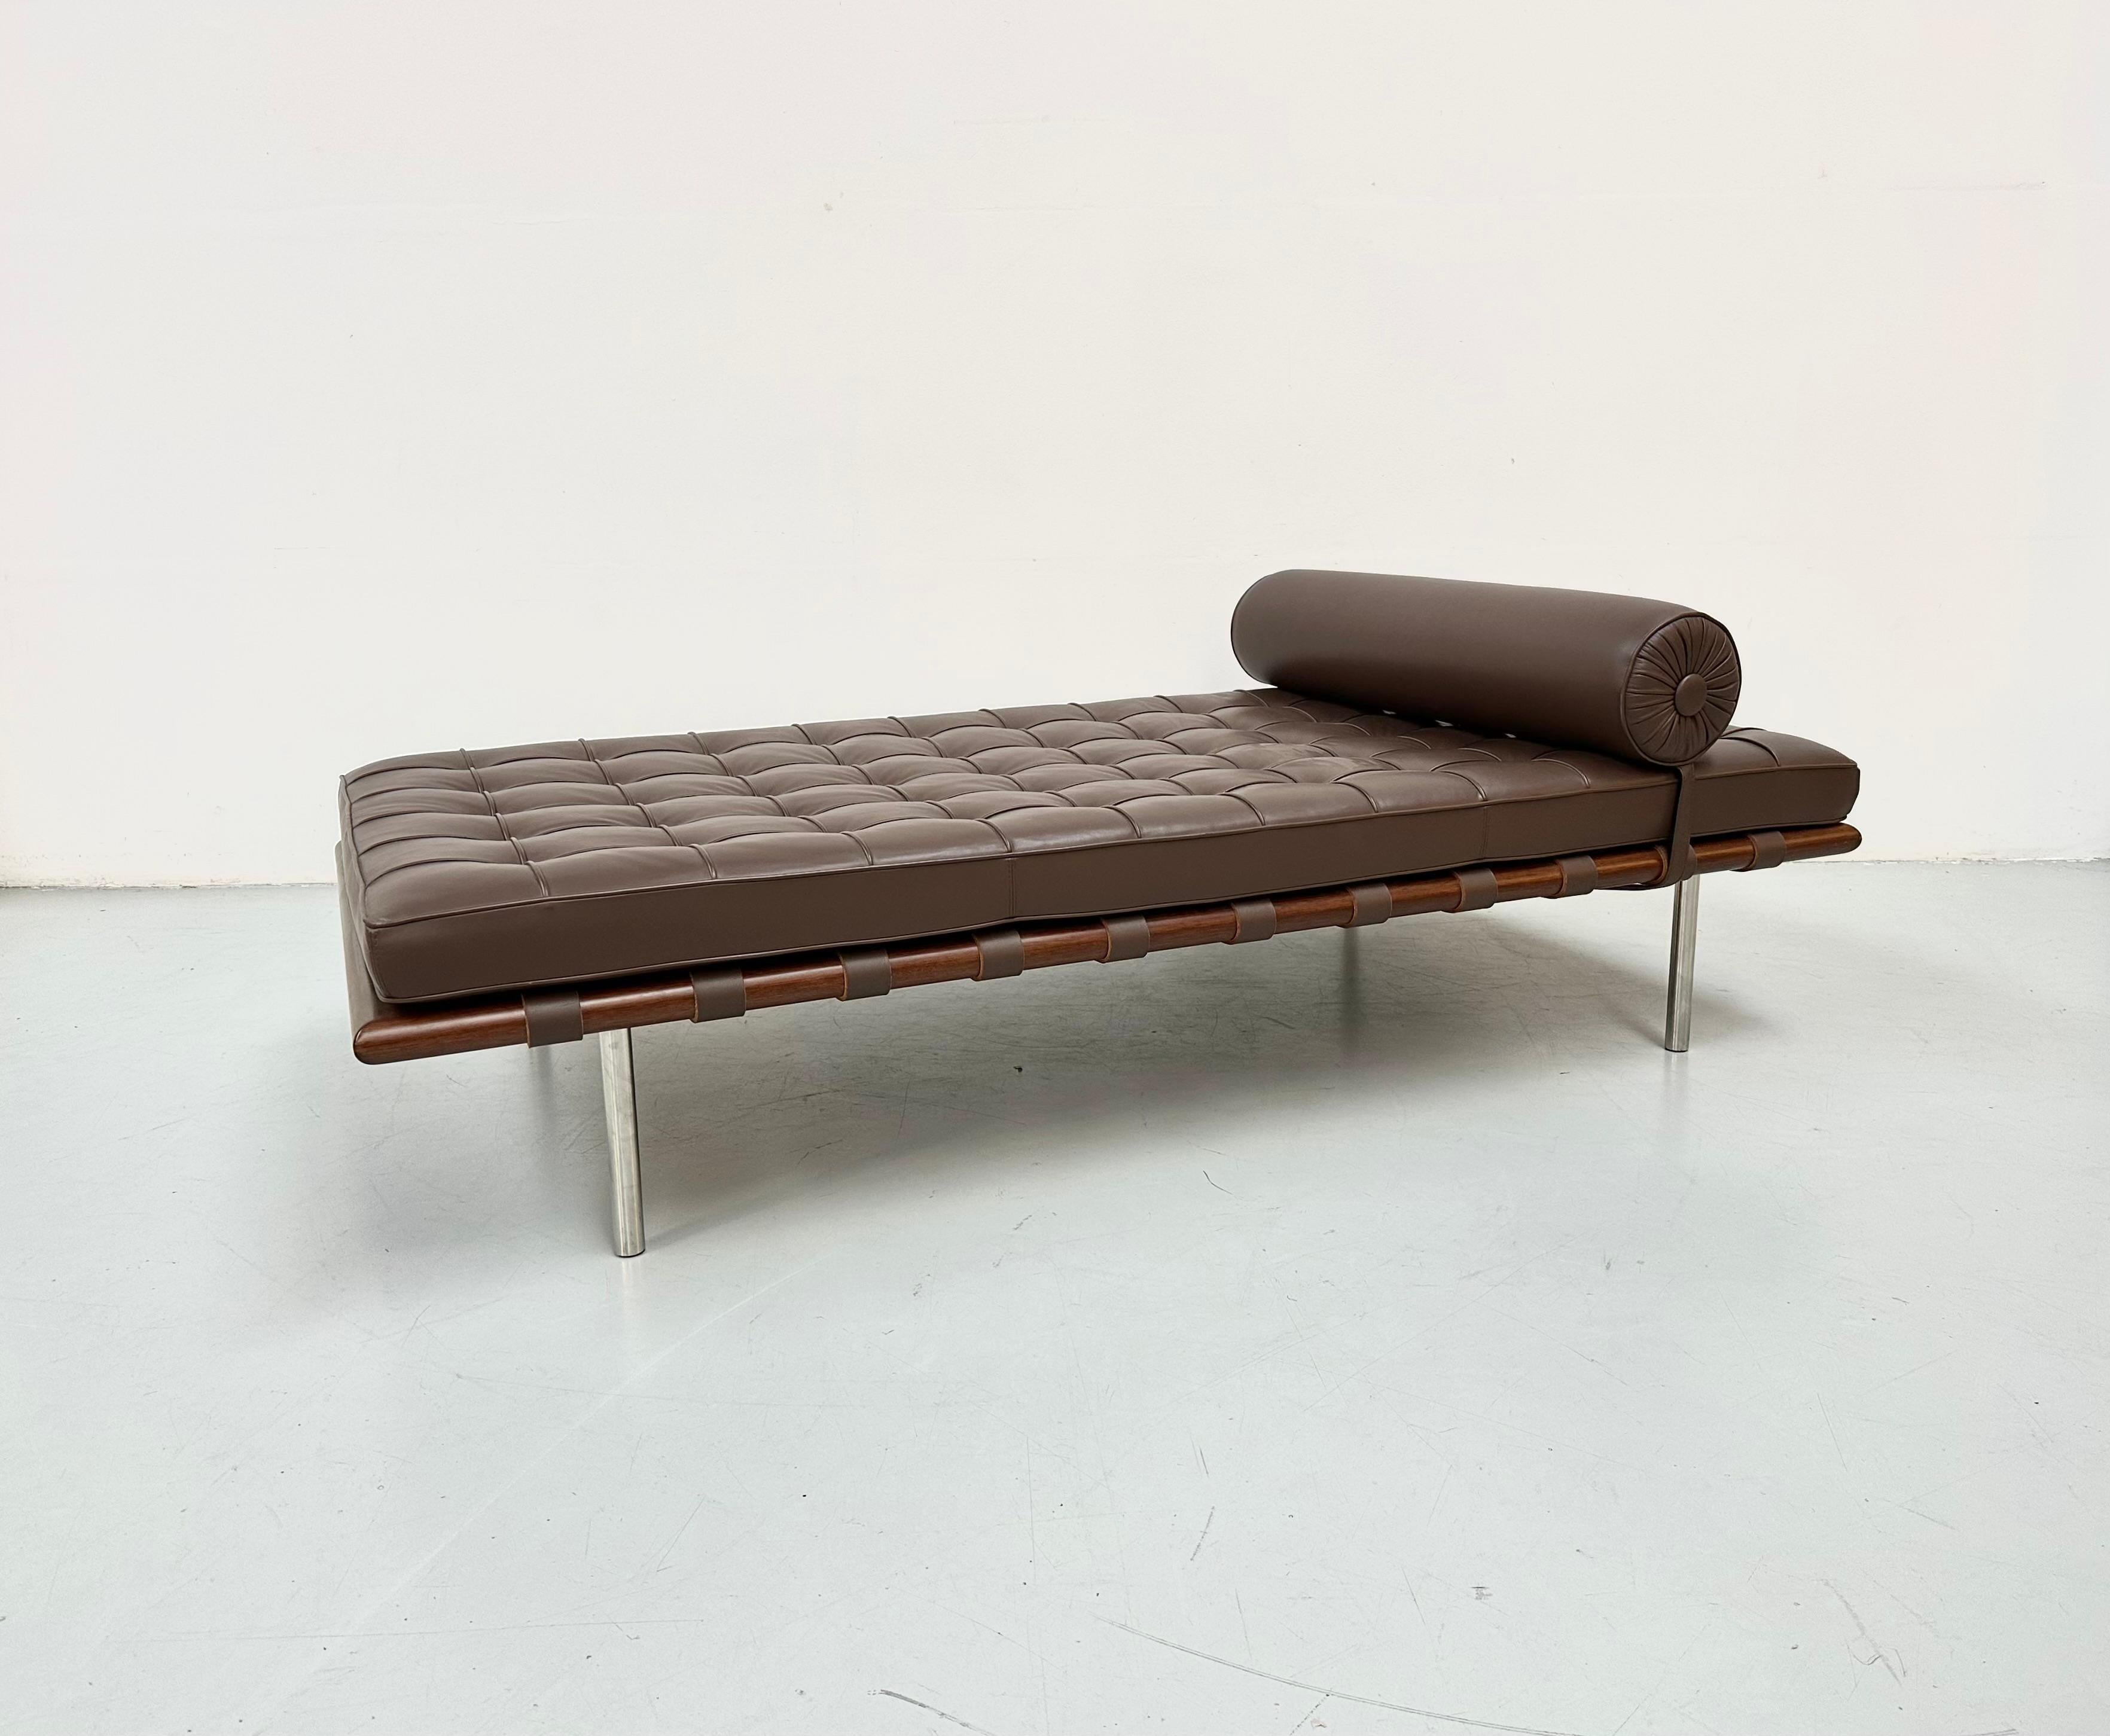 20th Century Barcelona Daybed in Brown Leather by Ludwig Mies van der Rohe for Knoll, 1980s. For Sale